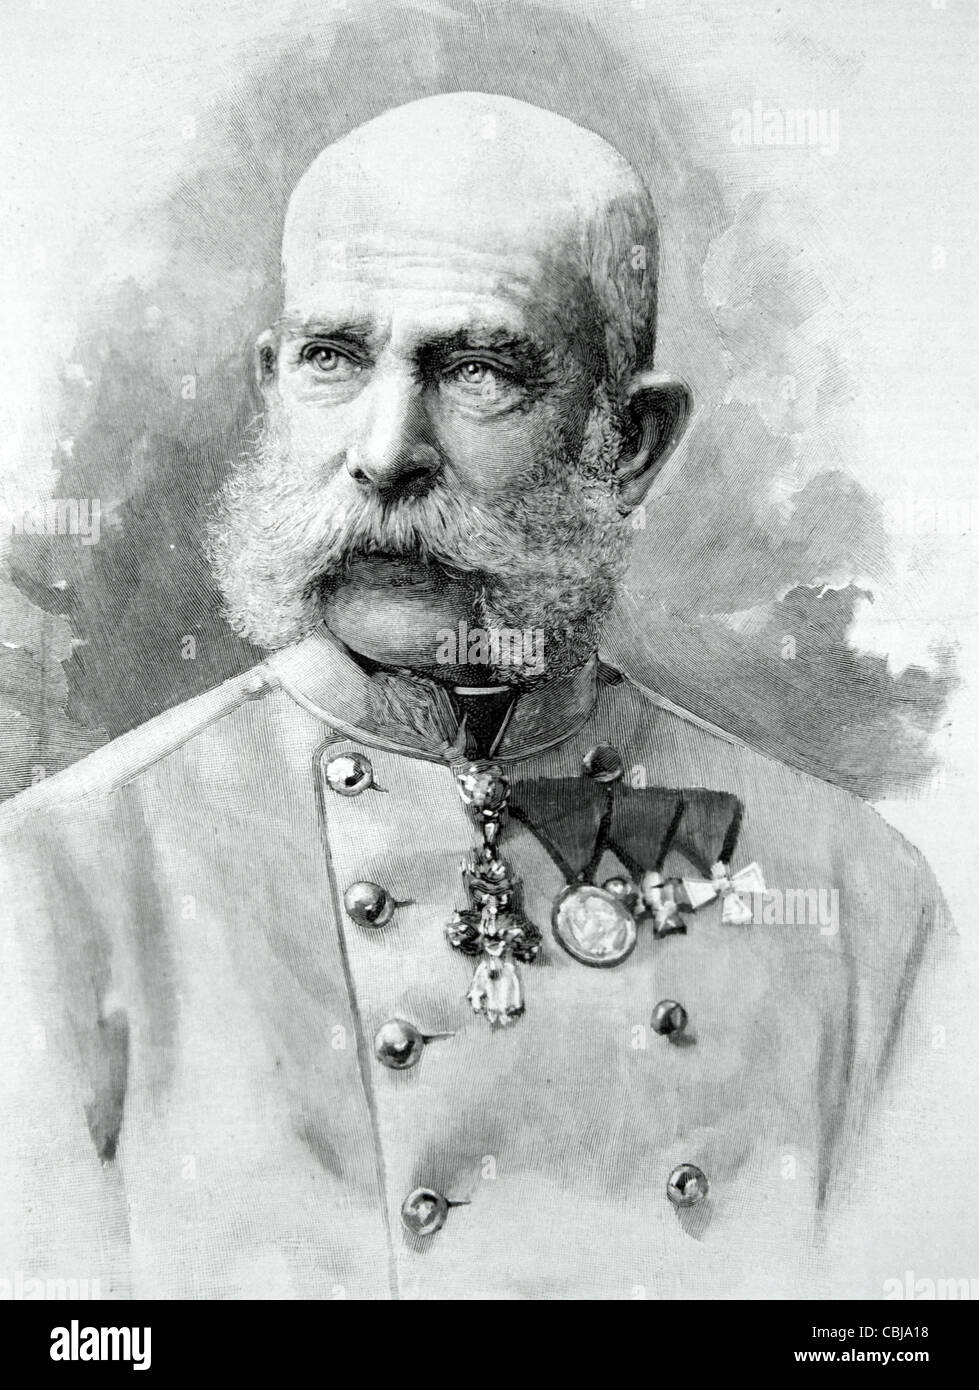 Portrait of Franz Joseph I or Francis Joseph I, Emperor of Austria (1848-1916) and King of Hungary (1867-1916). Austro-Hungarian Emperor. Vintage Illustration or Engraving Stock Photo